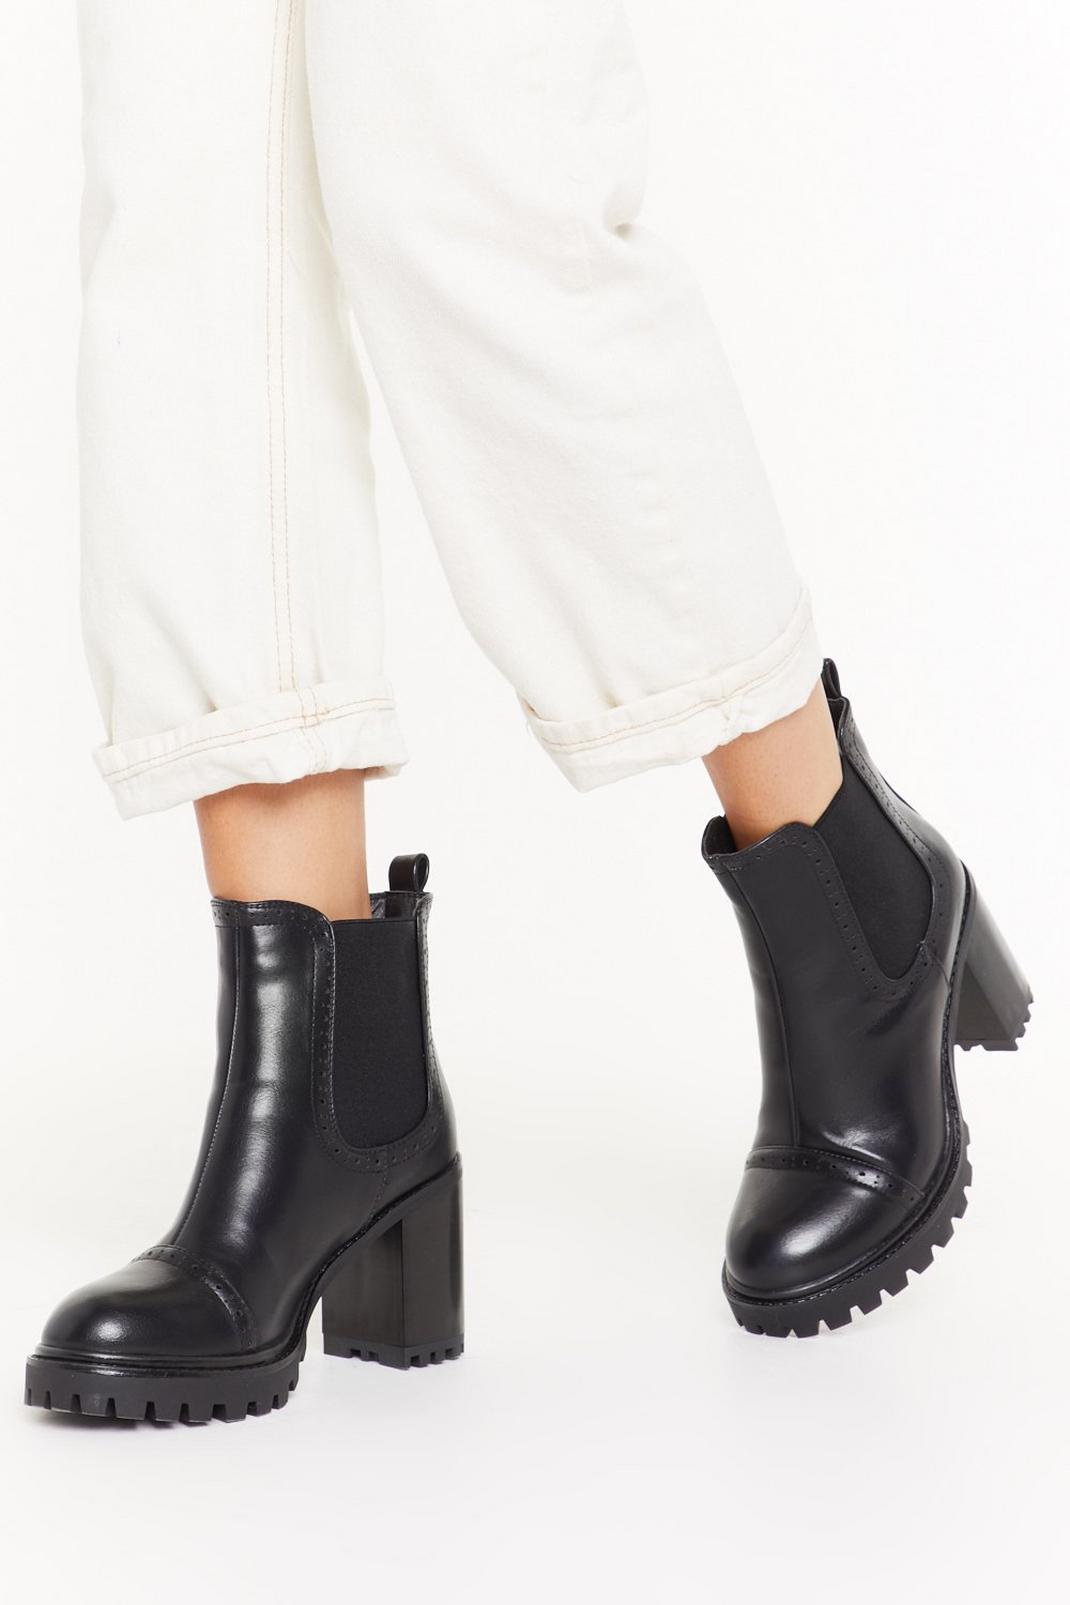 Pace Yourself Faux Leather Cleated Boots image number 1